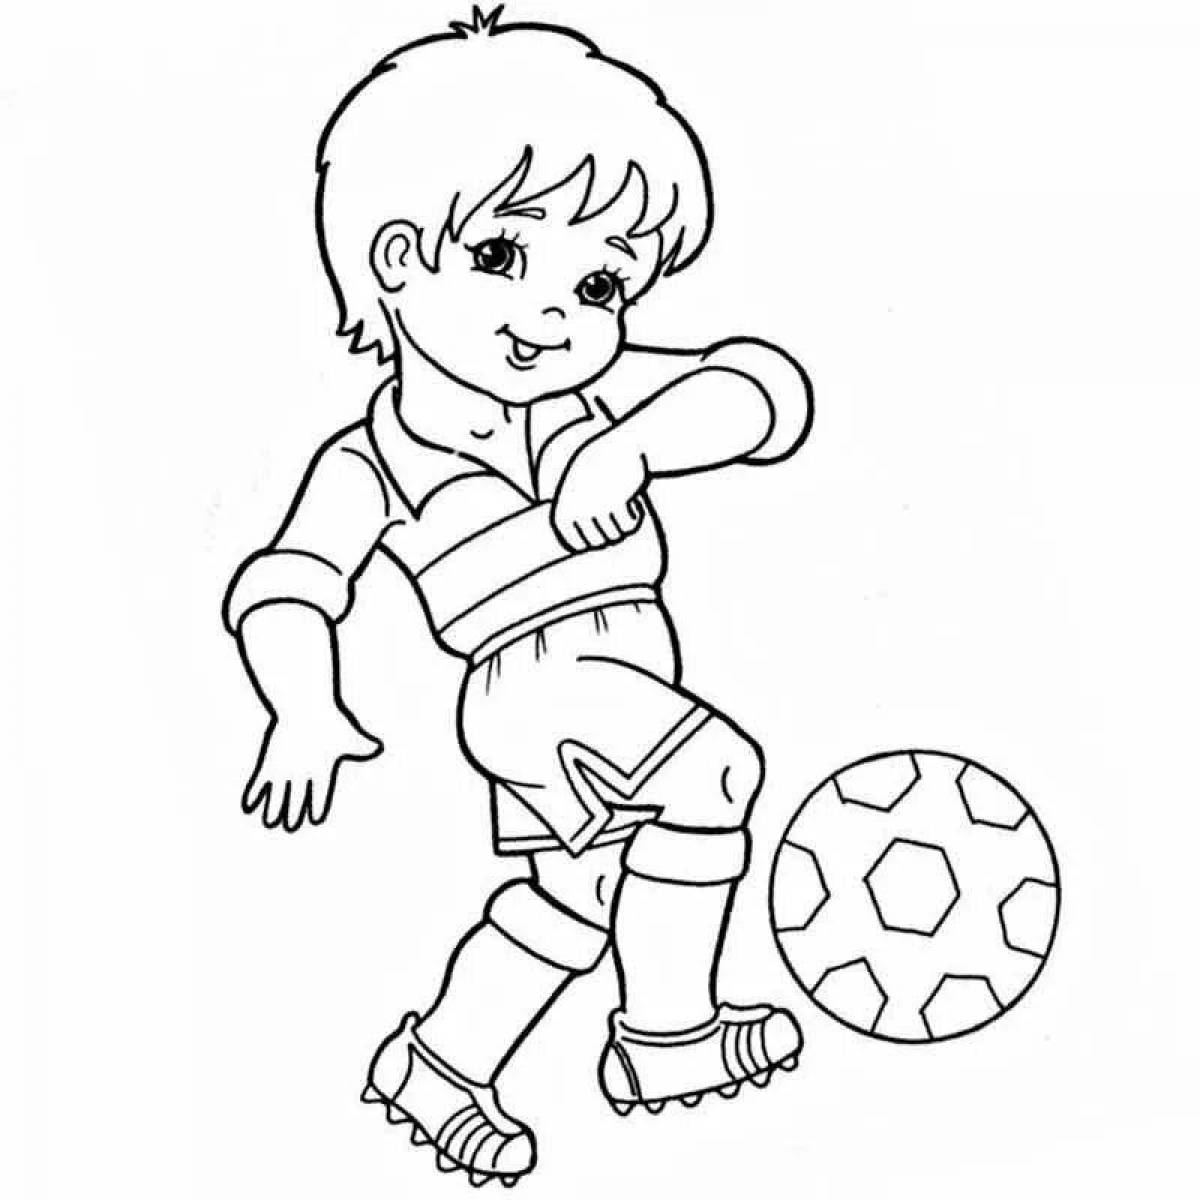 Steady soccer player with ball